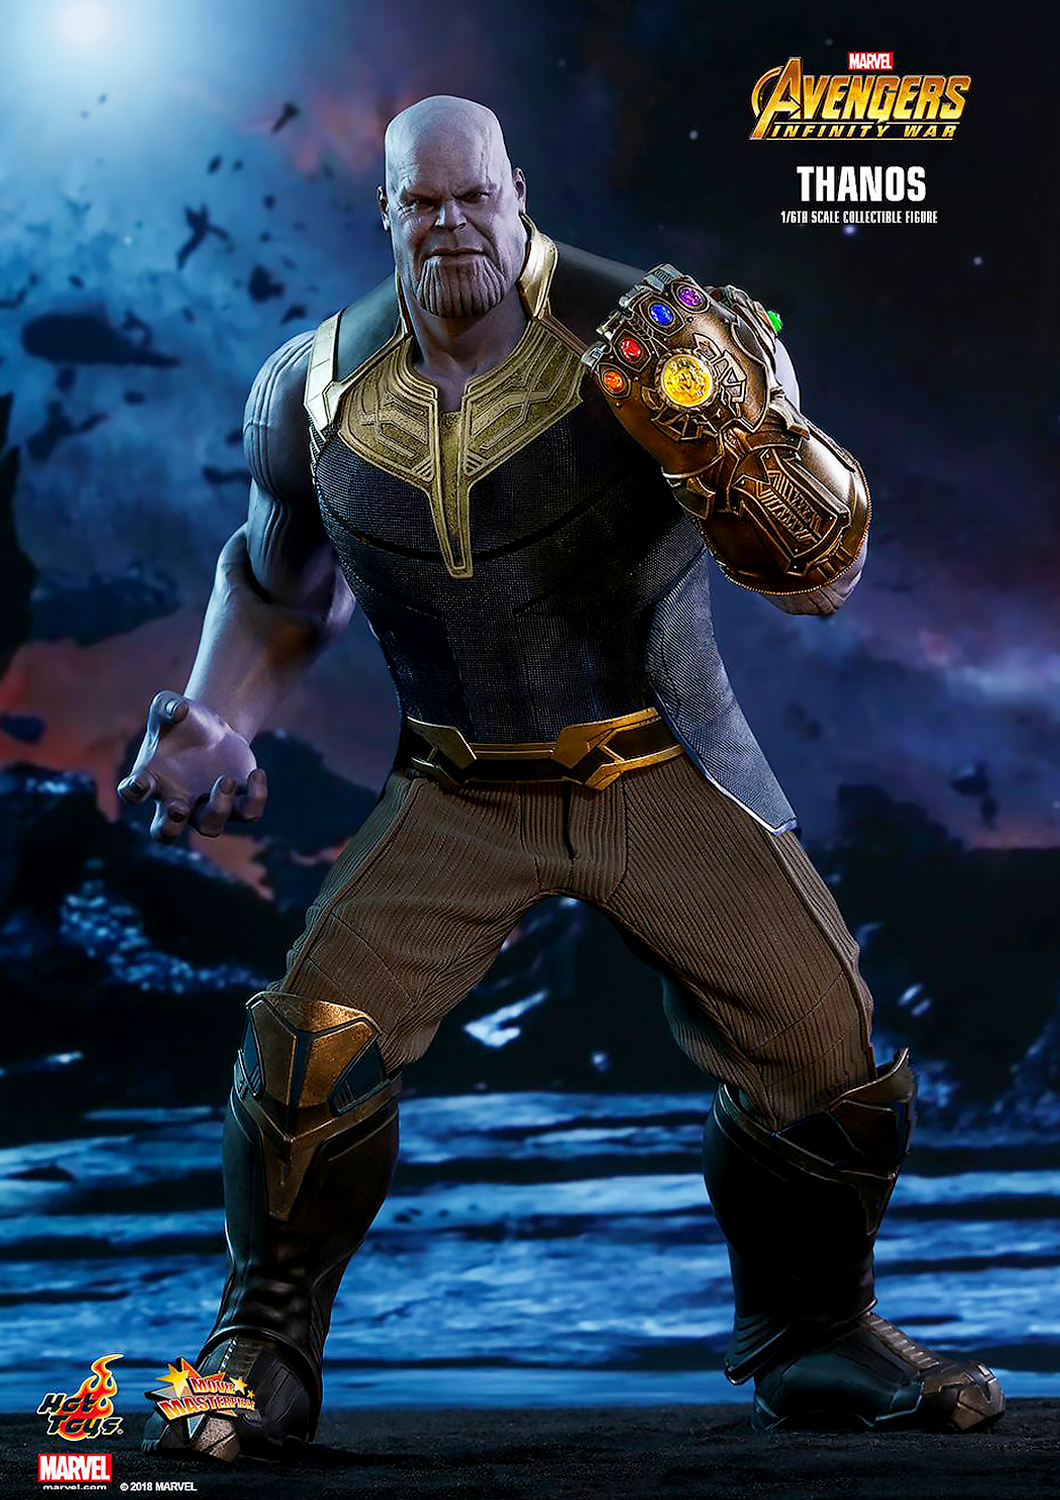 HOT TOYS MARVEL AVENGERS INFINITY WAR THANOS COLLECTIBLE FIGURE 1/6TH SCALE - MMS479 - Anotoys Collectibles